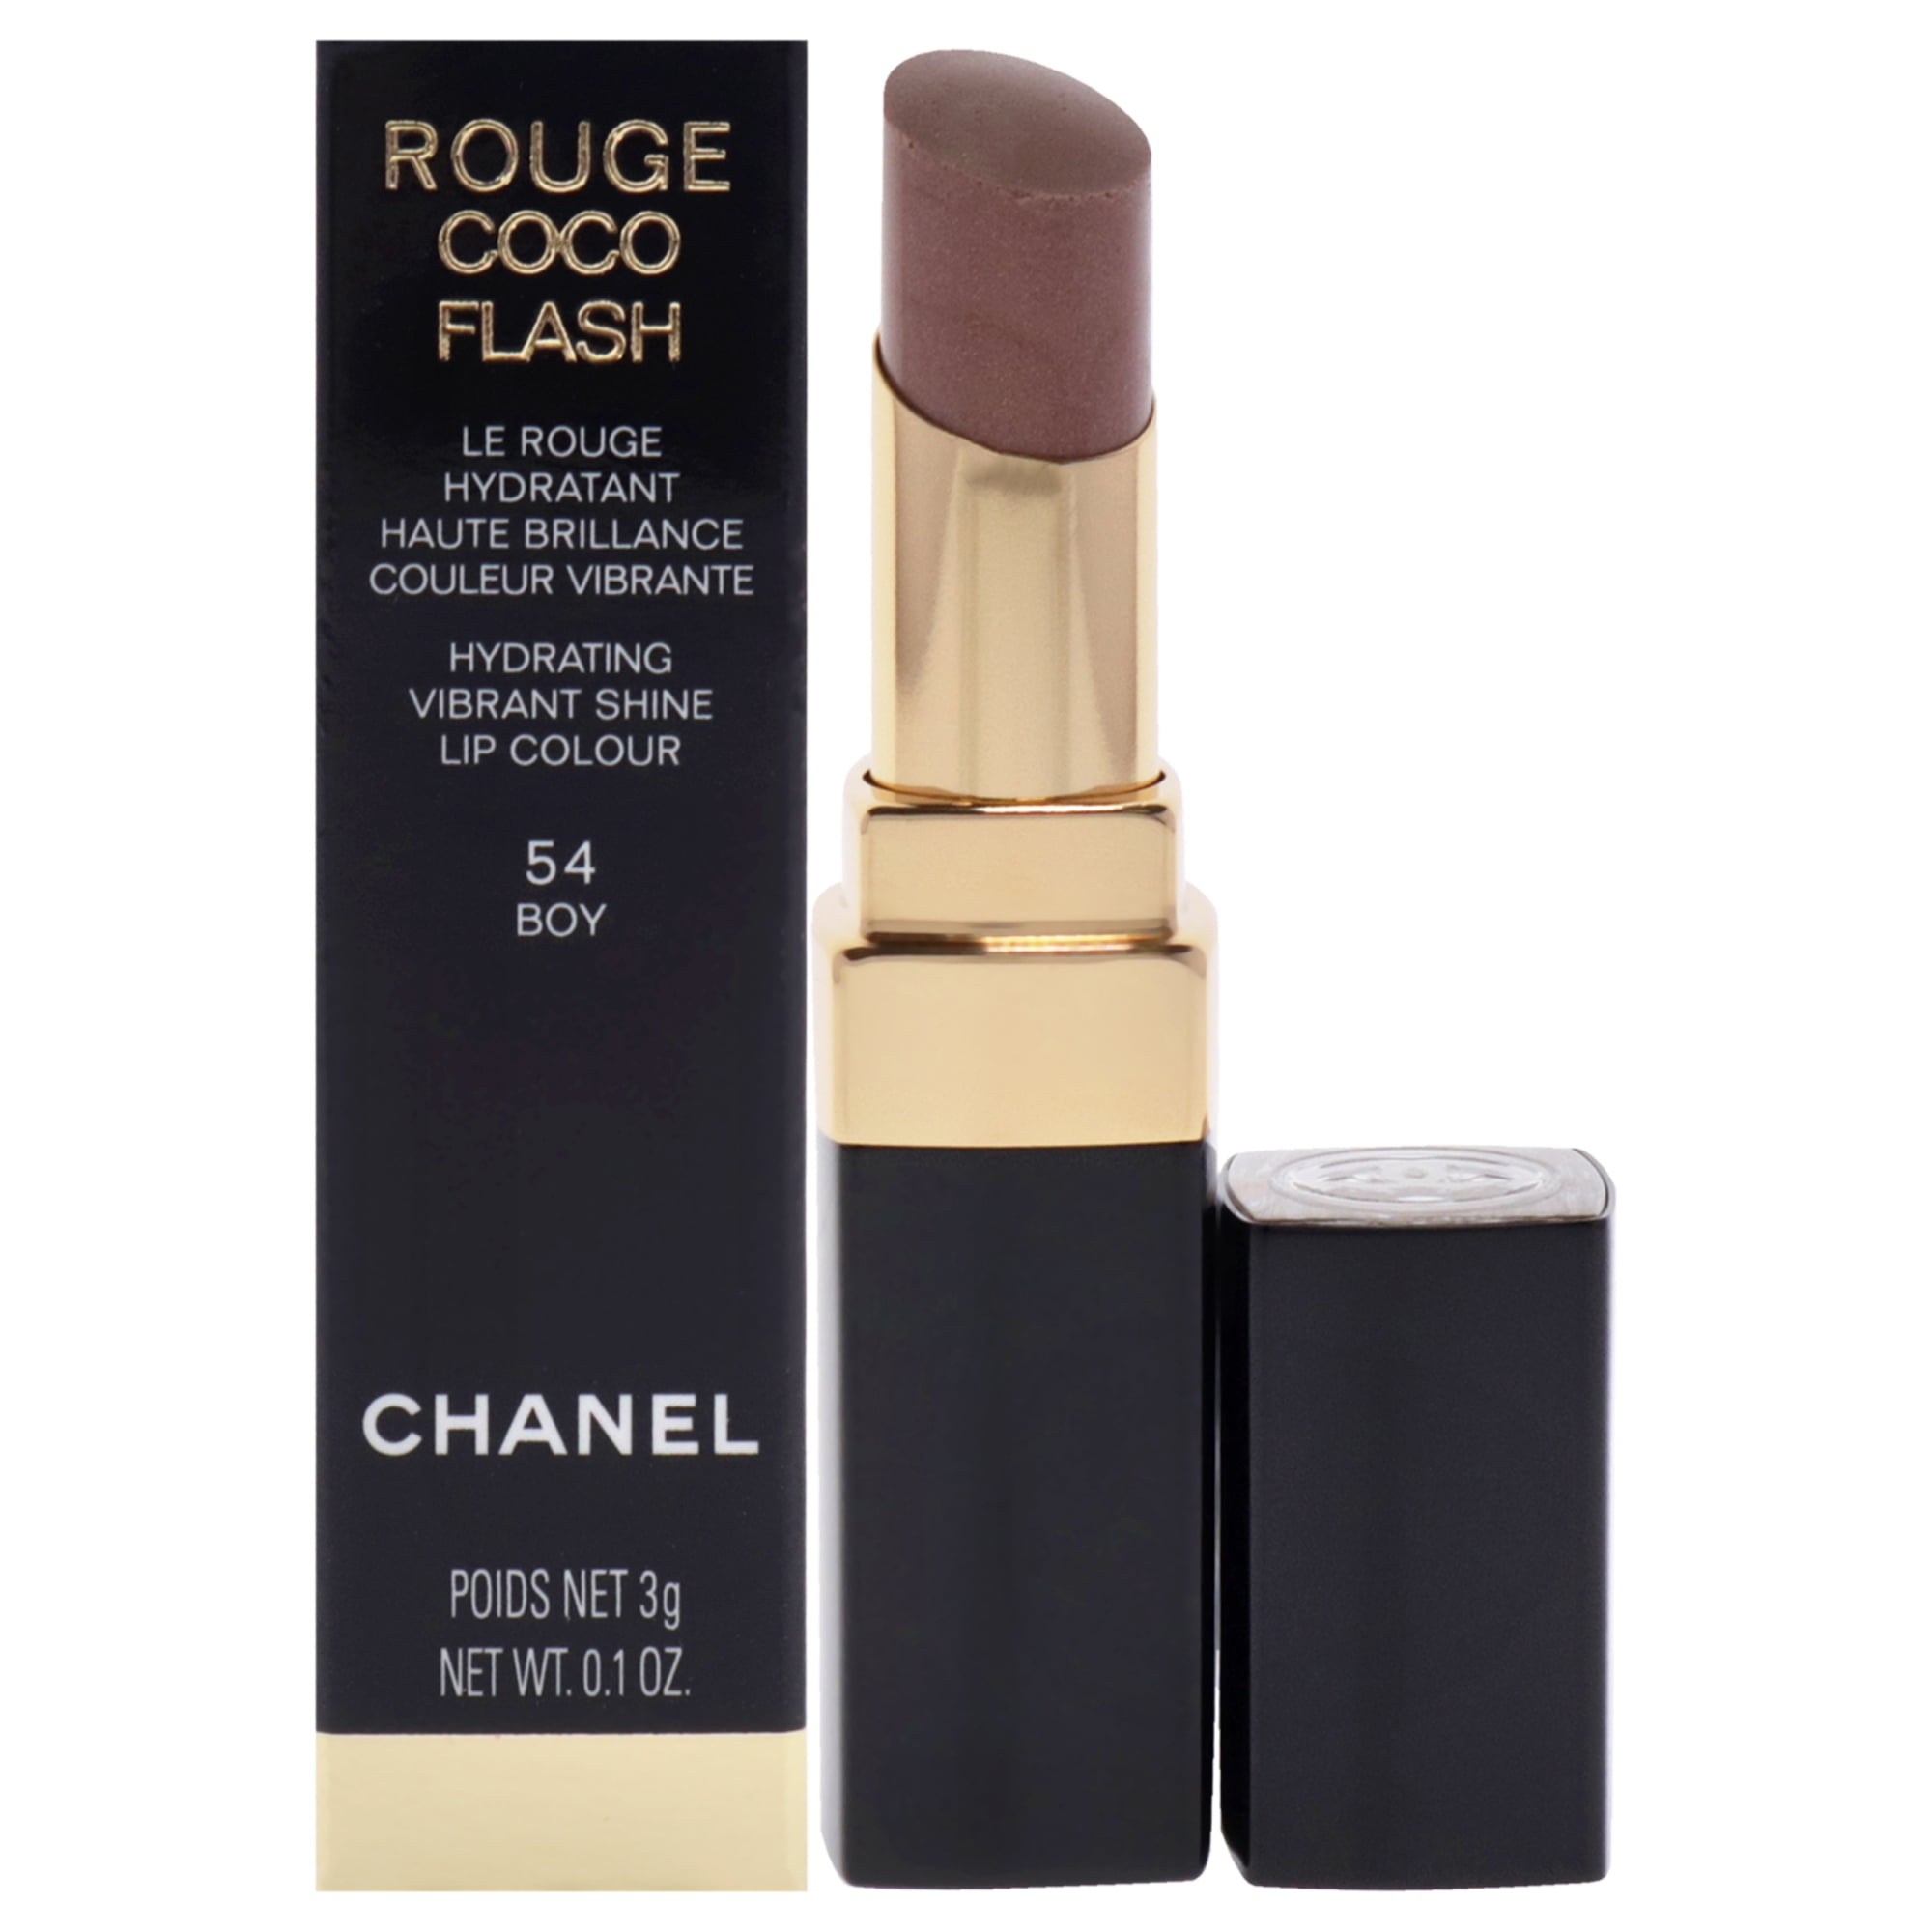 Chanel Rouge Coco Flash Boy Lipstick Review 